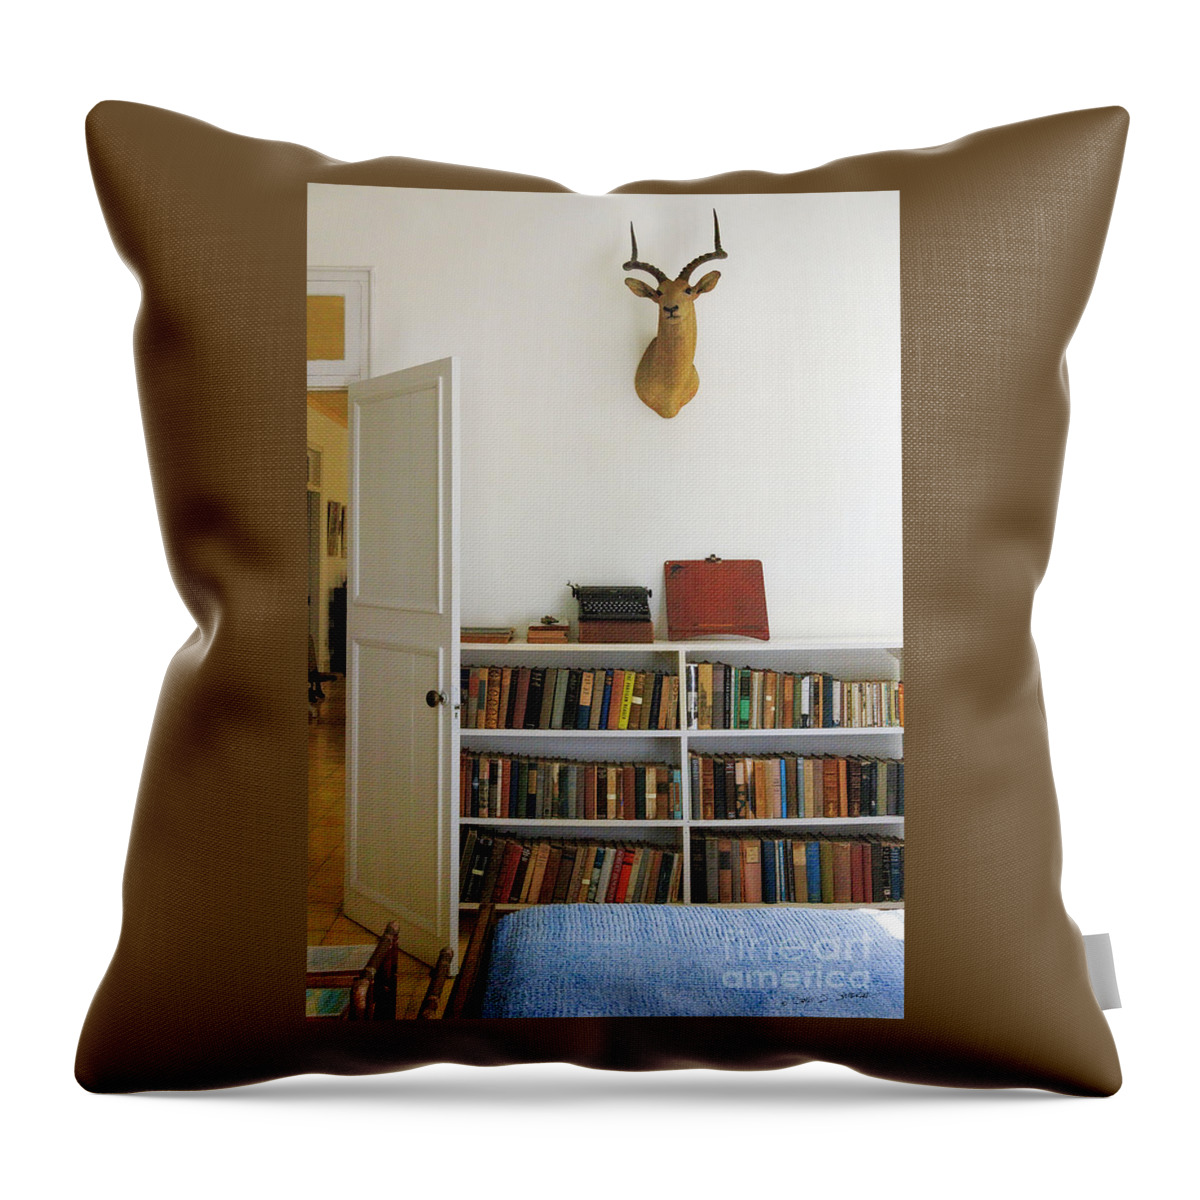 Tranquility Throw Pillow featuring the photograph Hemingways' Cuba House No. 3 by Craig J Satterlee